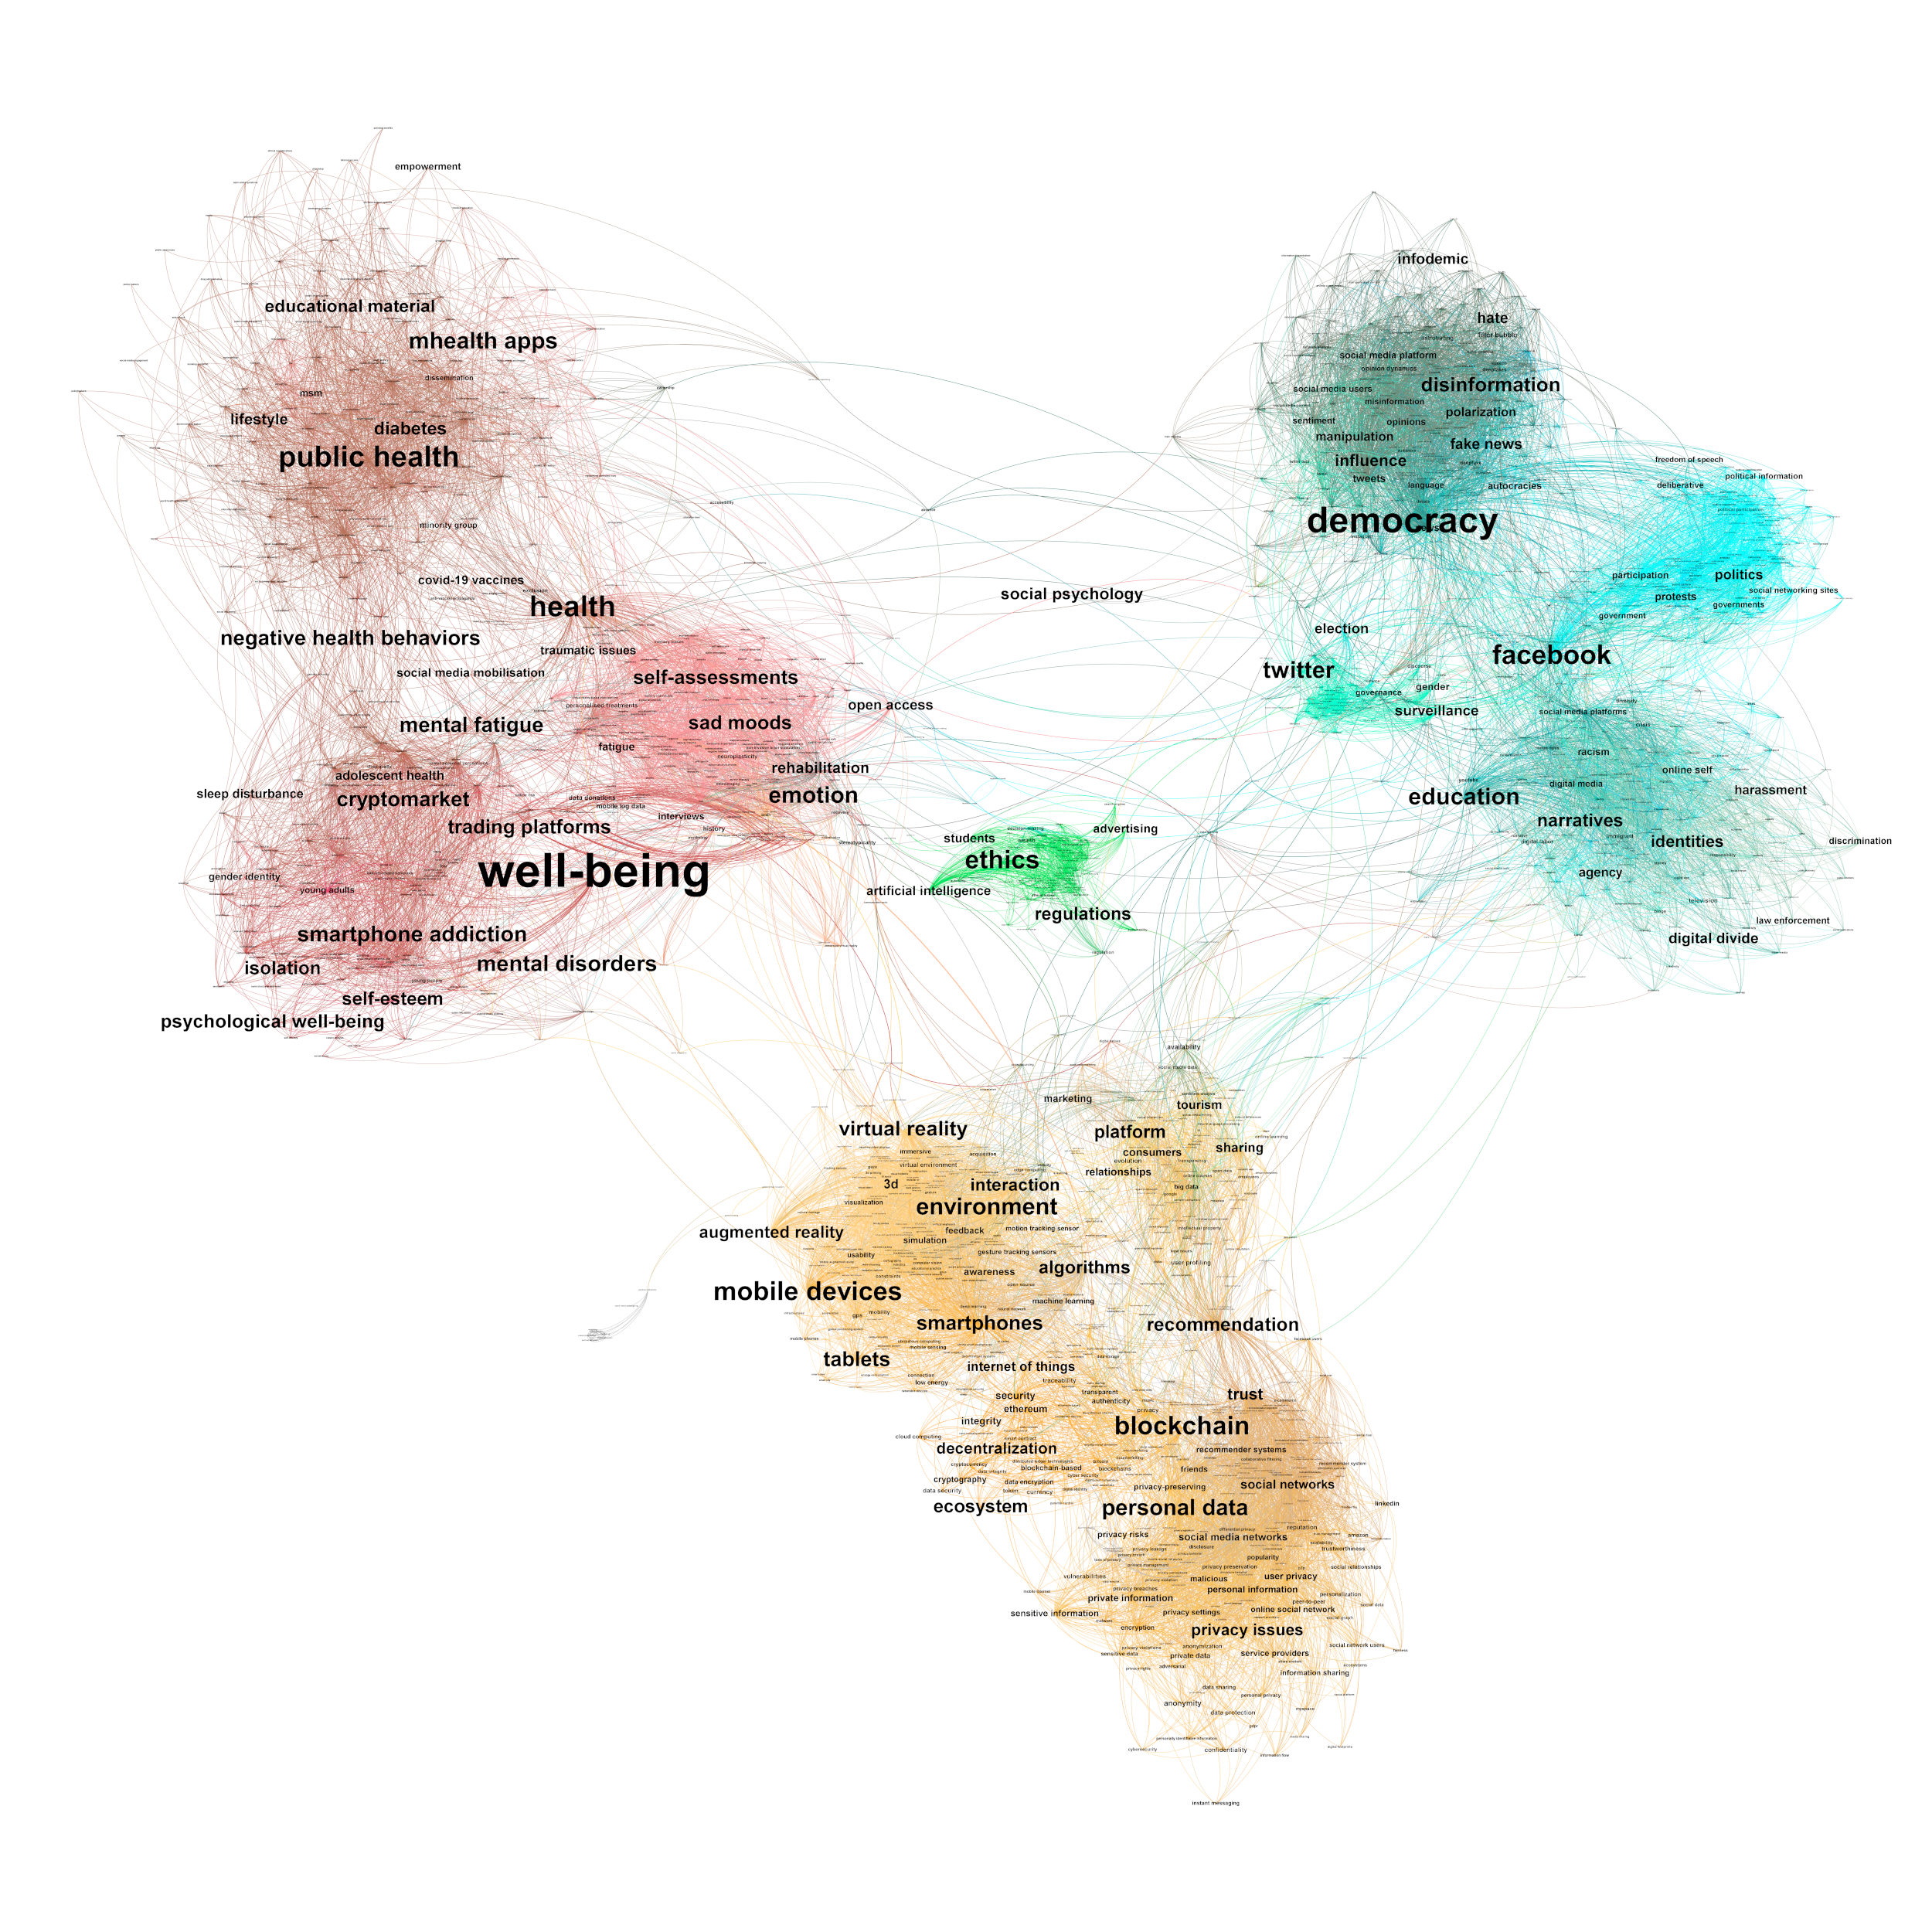 Mapping the litterature on Digital Media and Human Well-Being